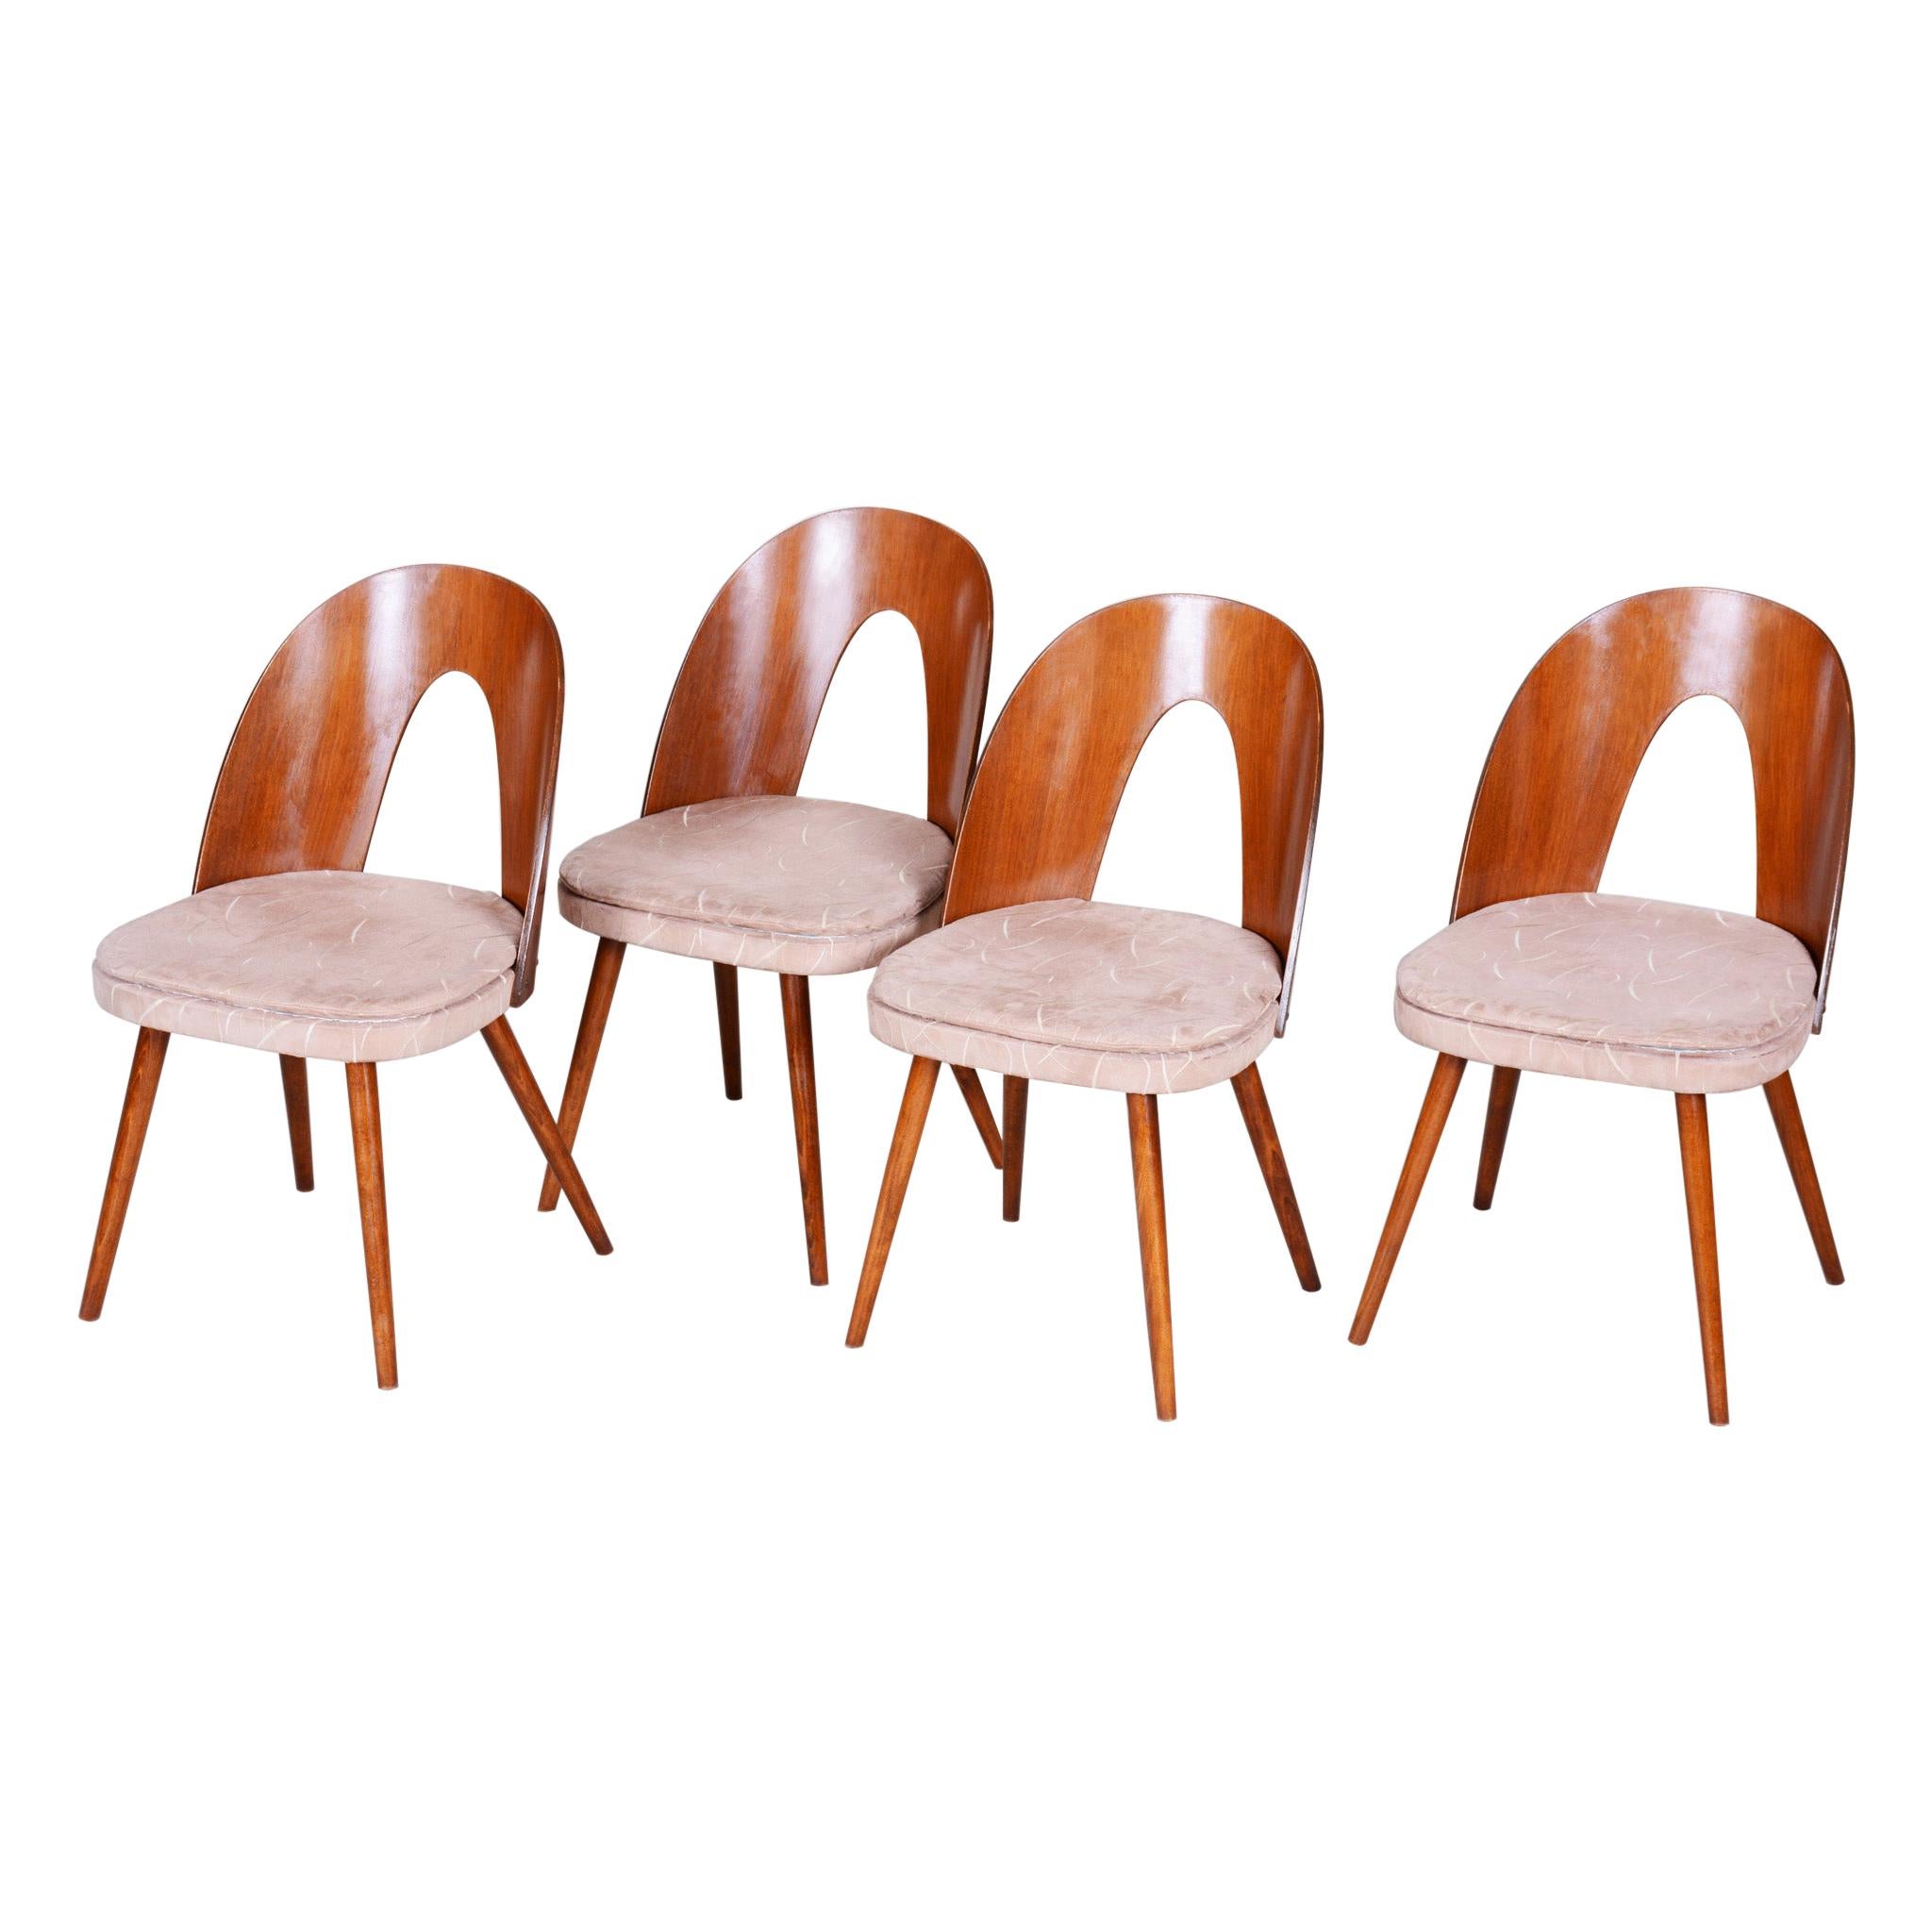 Well Preserved Czech Brown and Beige Chairs by Antonín Šuman, 4 Pcs, 1950s For Sale